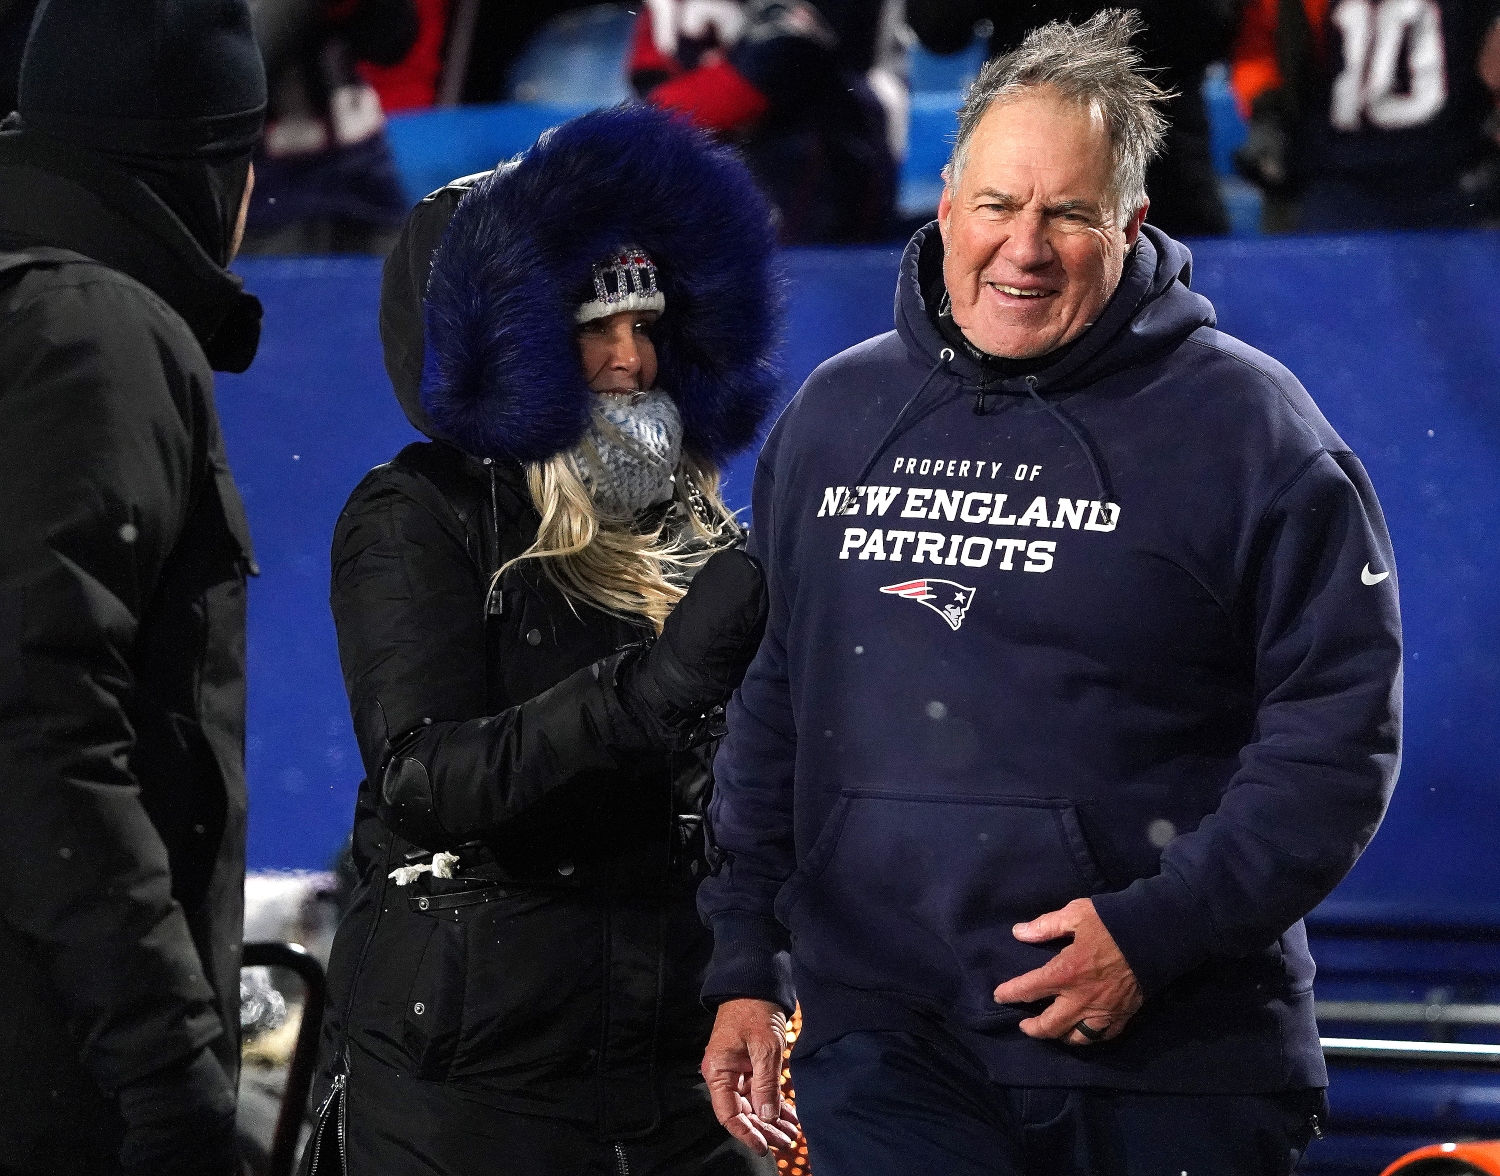 New England Patriots head coach Bill Belichick stands with his partner, Linda Holliday, following a win over the Buffalo Bills.